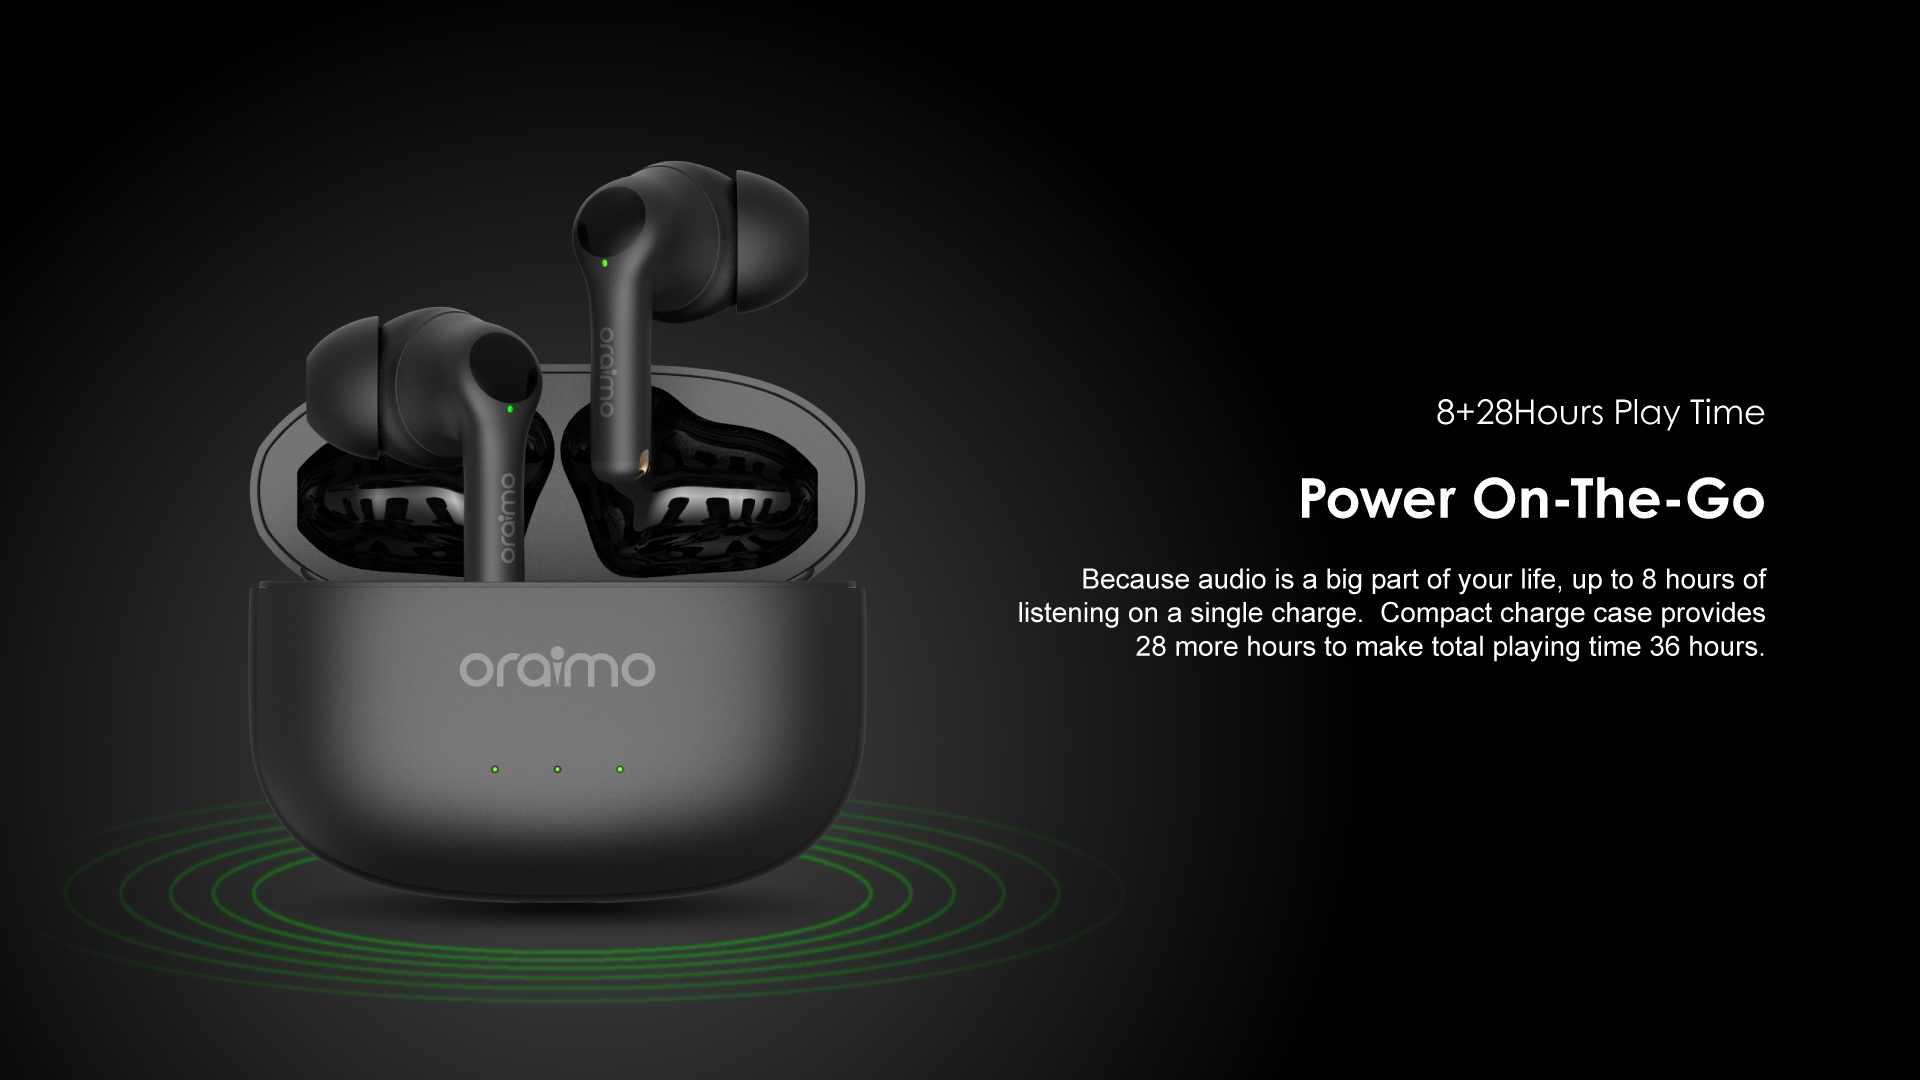 oraimo FreePods 3 OEB- E104D 2baba tuned for Afrobeat TWS True Wireless Stereo Earbuds